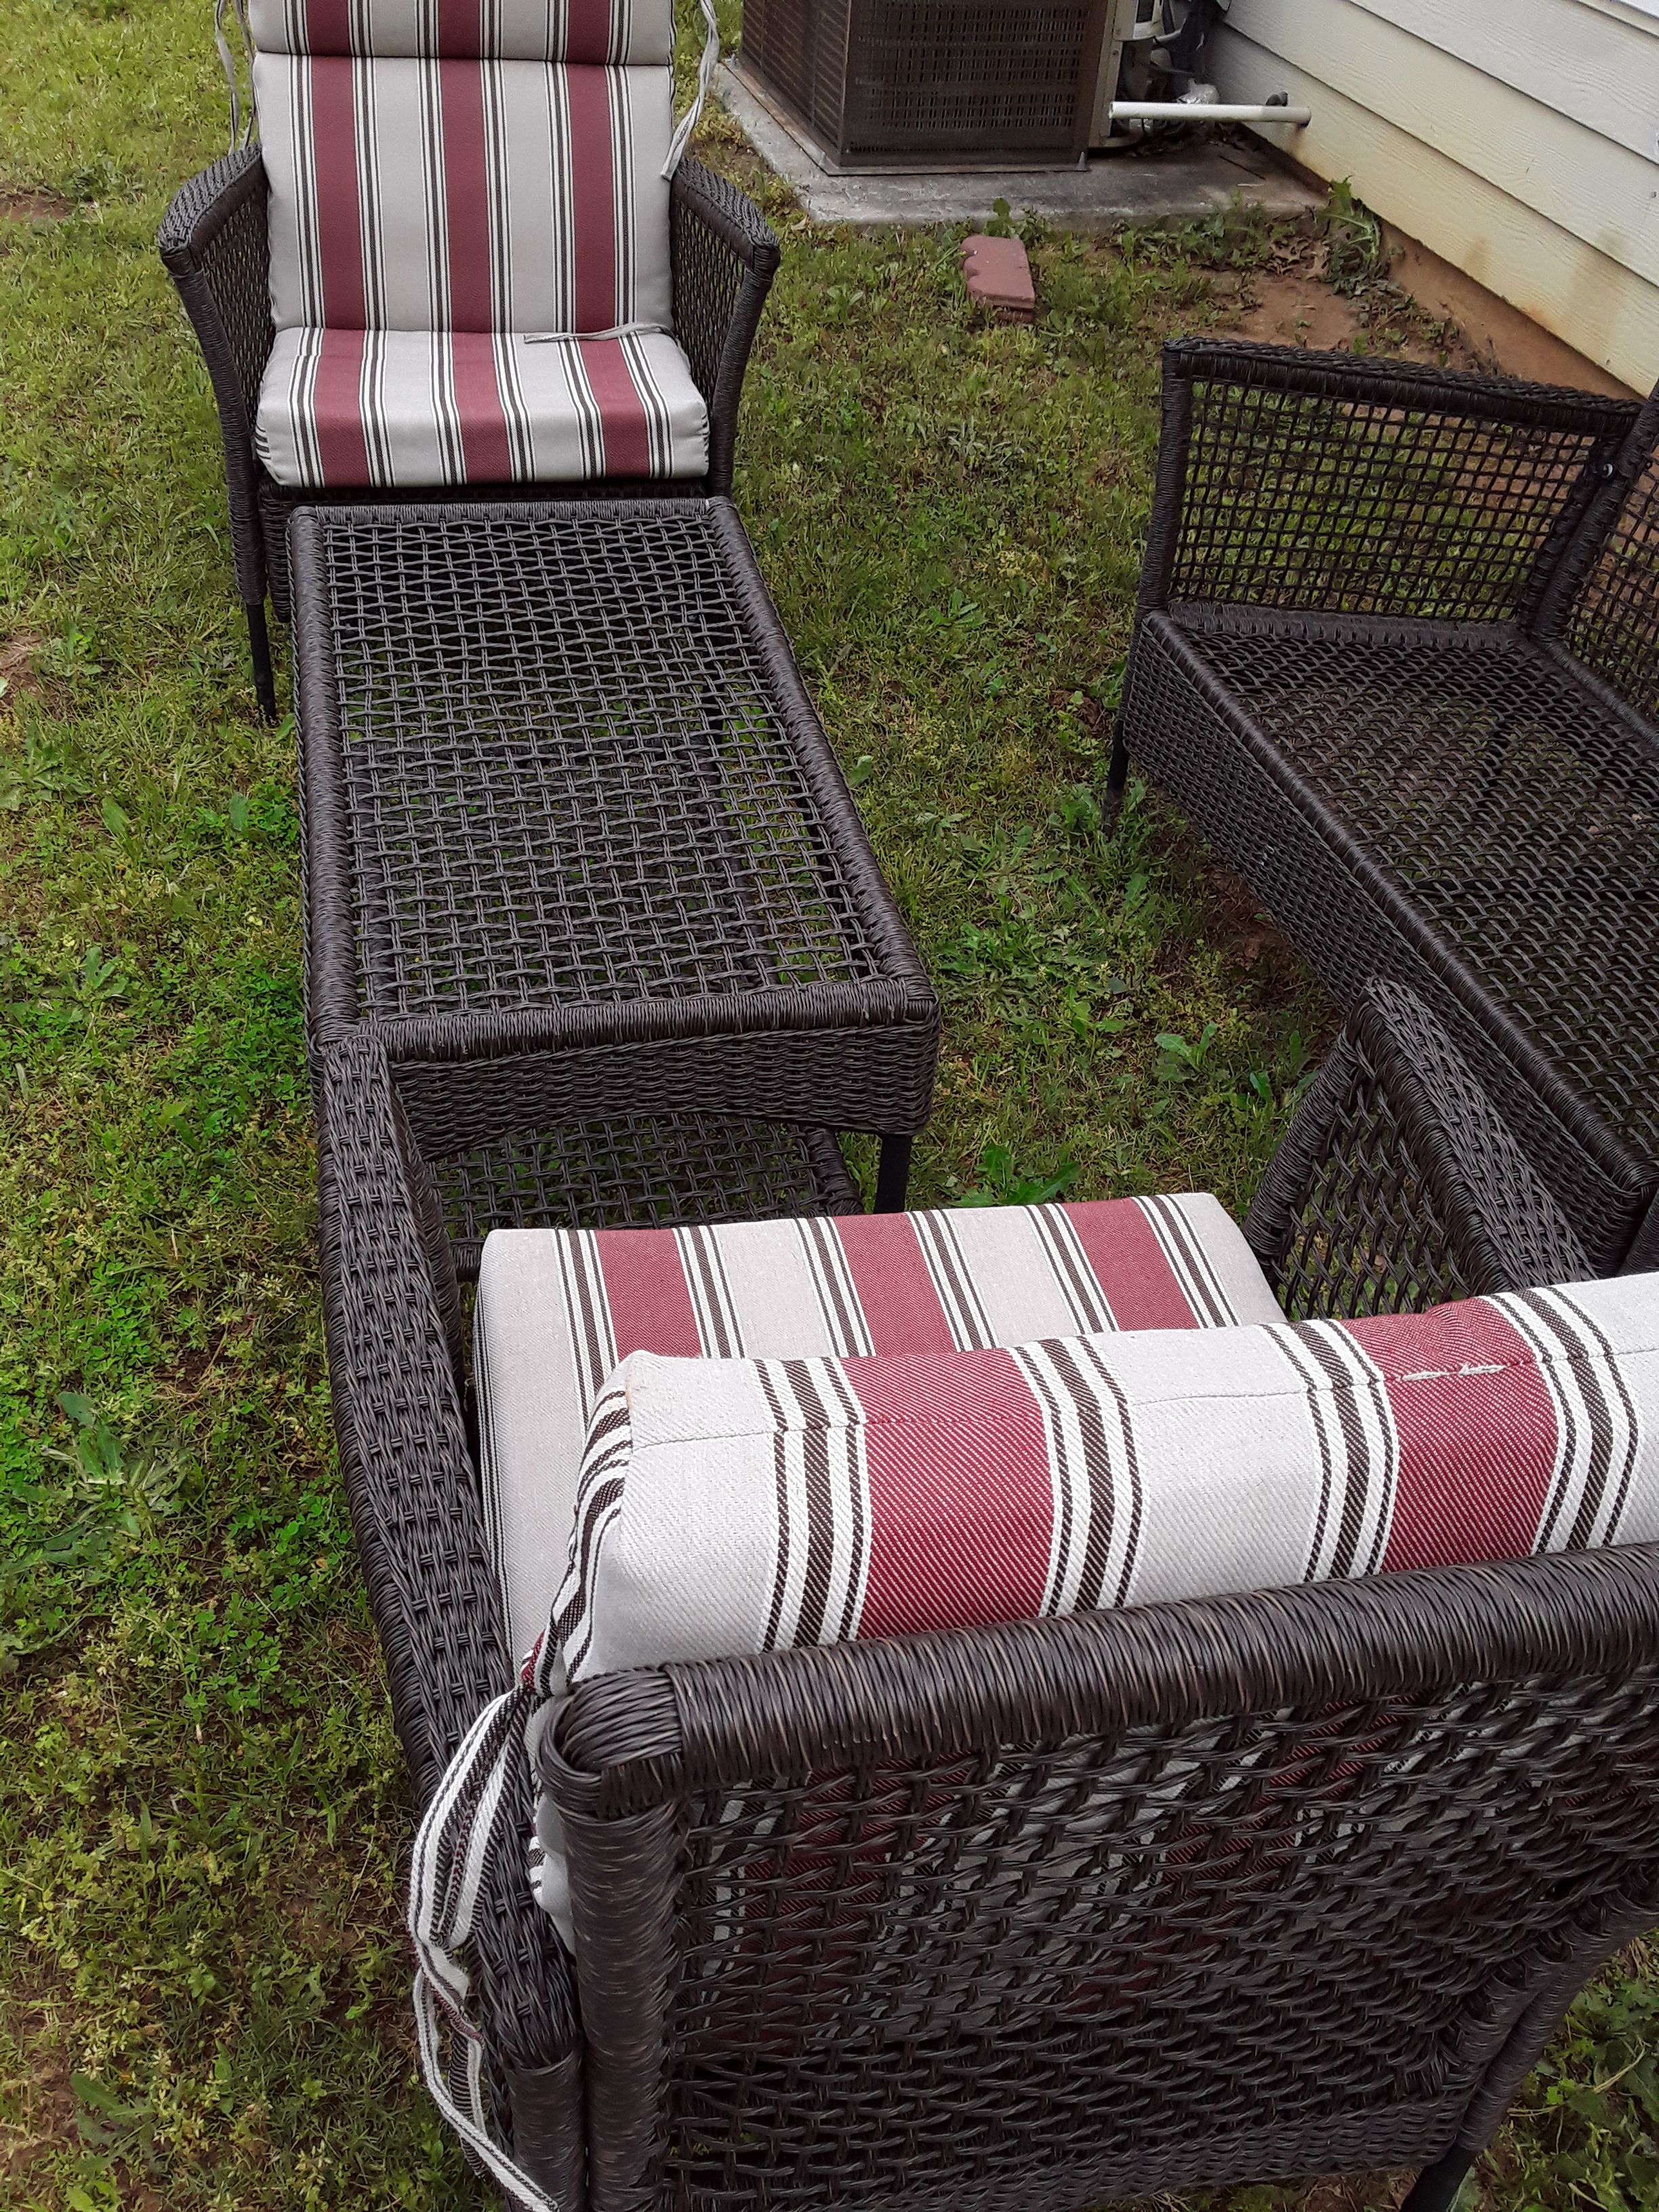 Patio furniture new and assembled with cushions